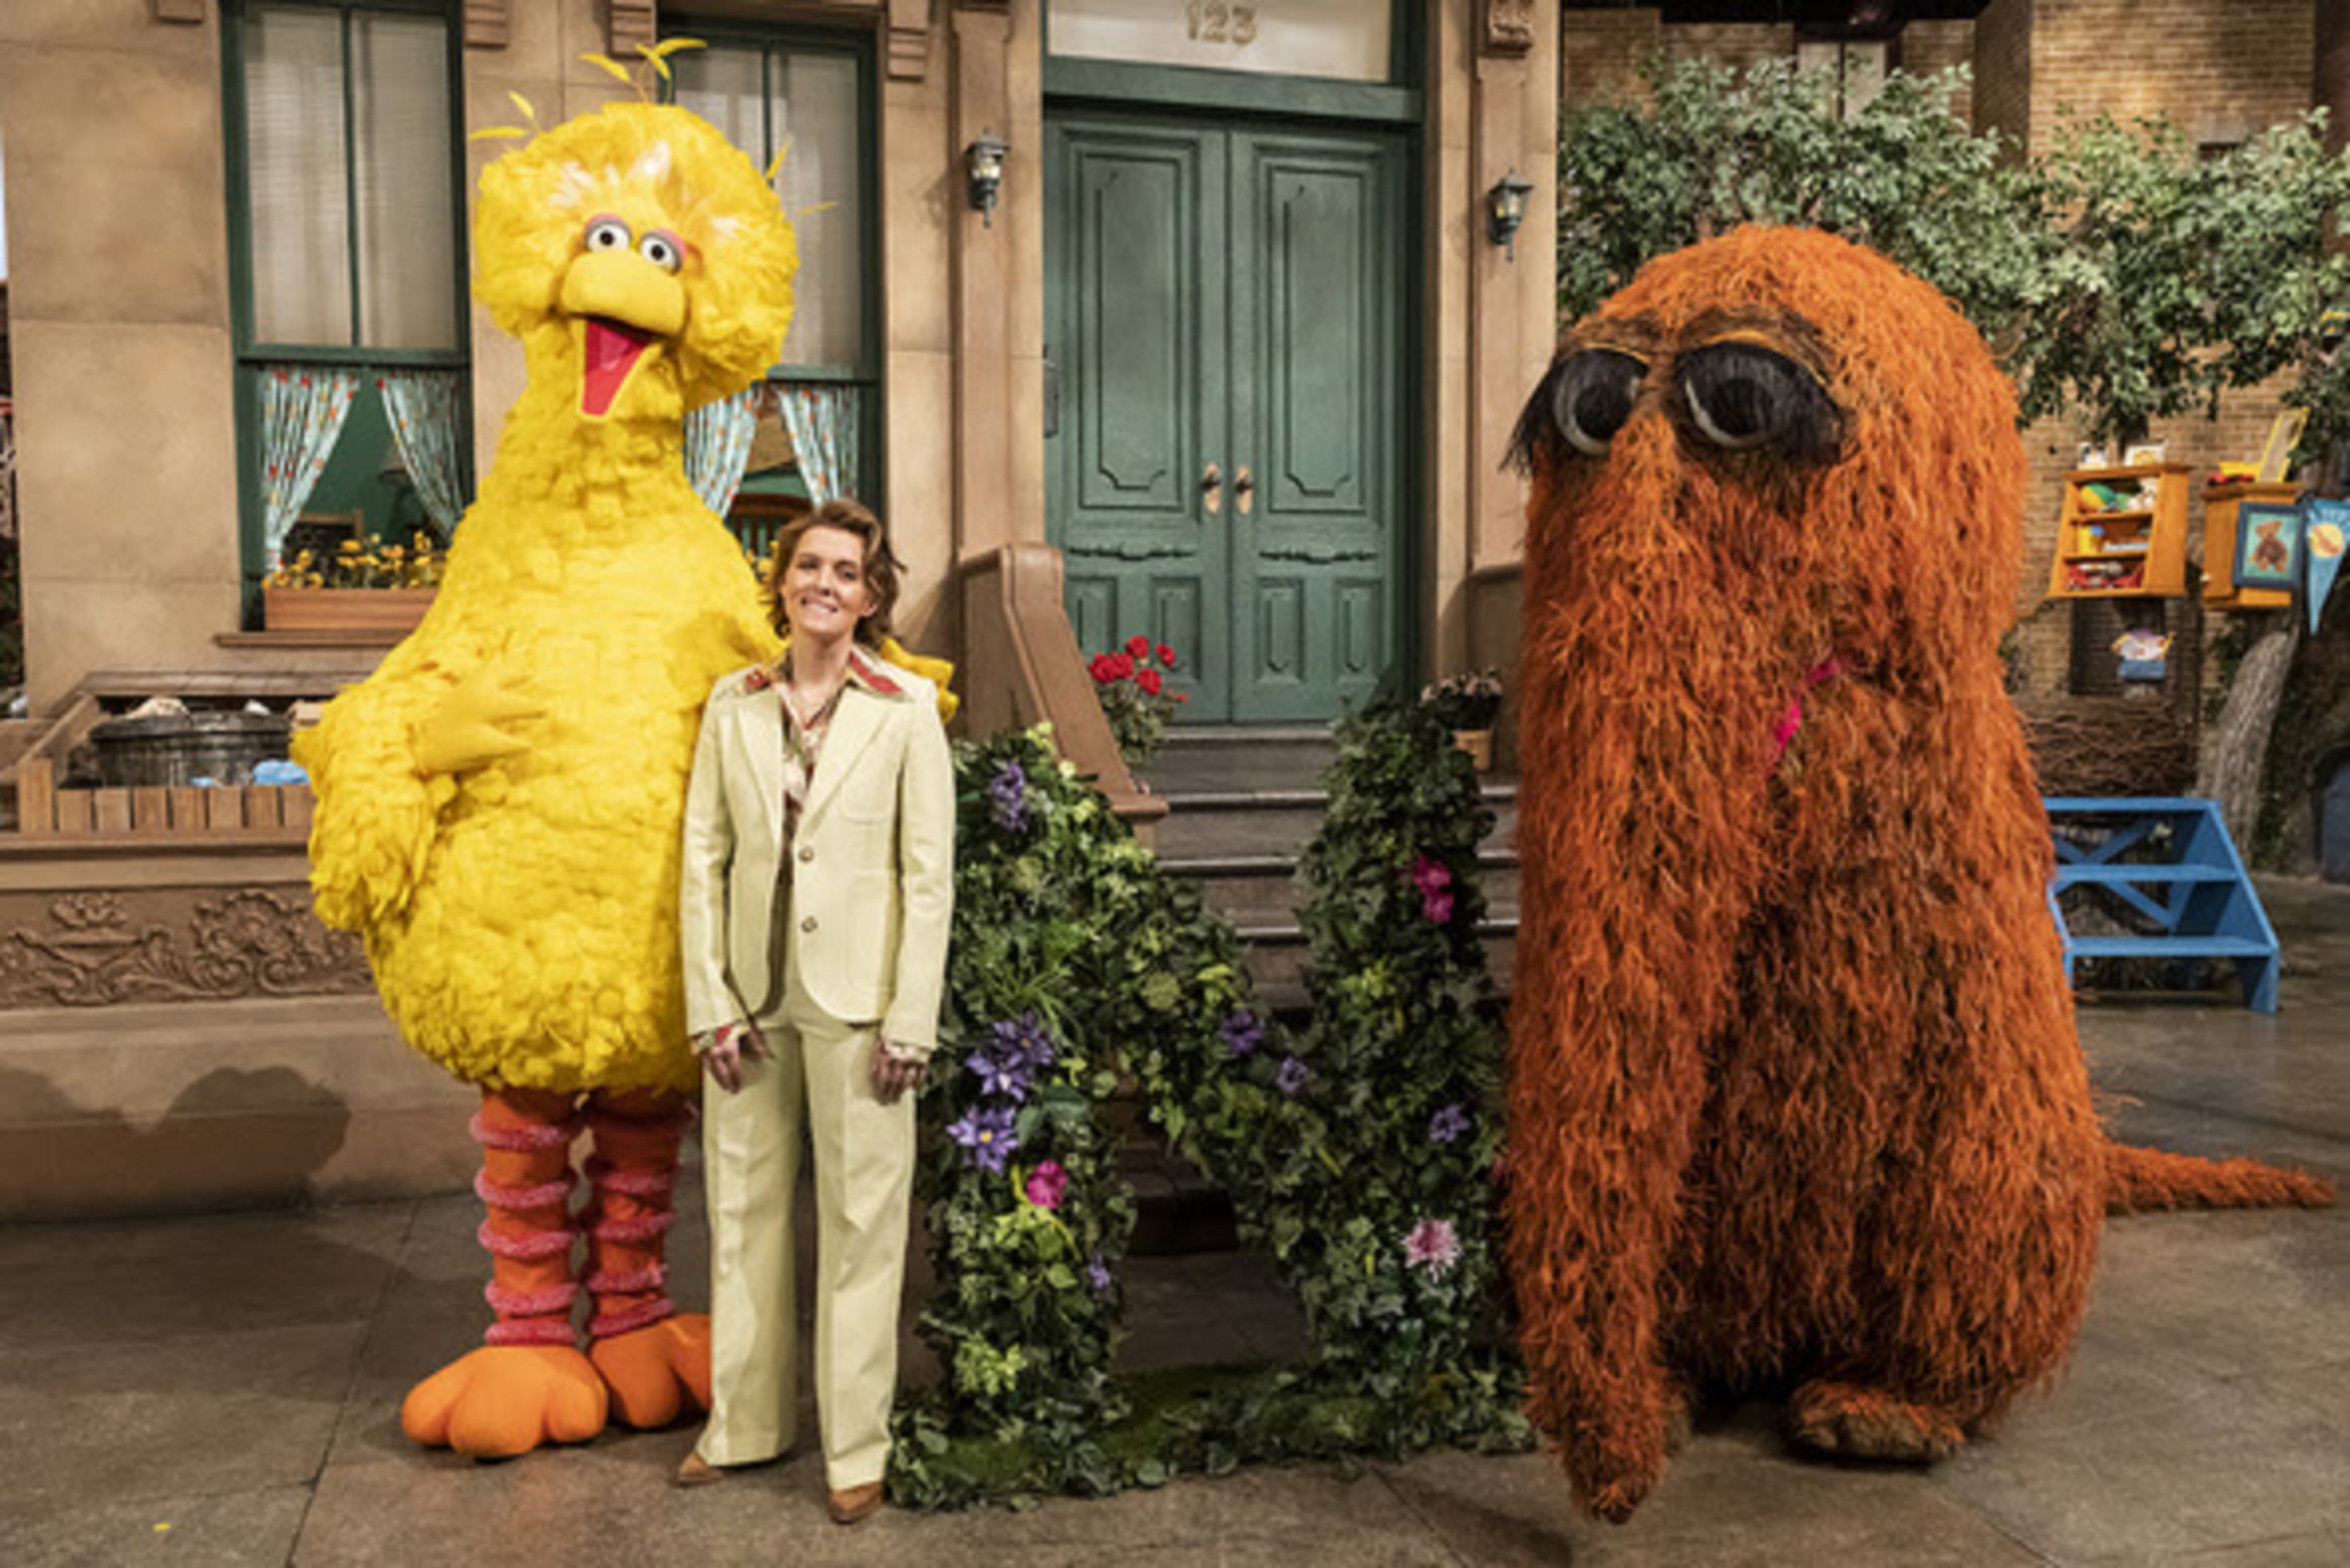 Brandi Carlile performs “That's Why We Love Nature” on Sesame Street